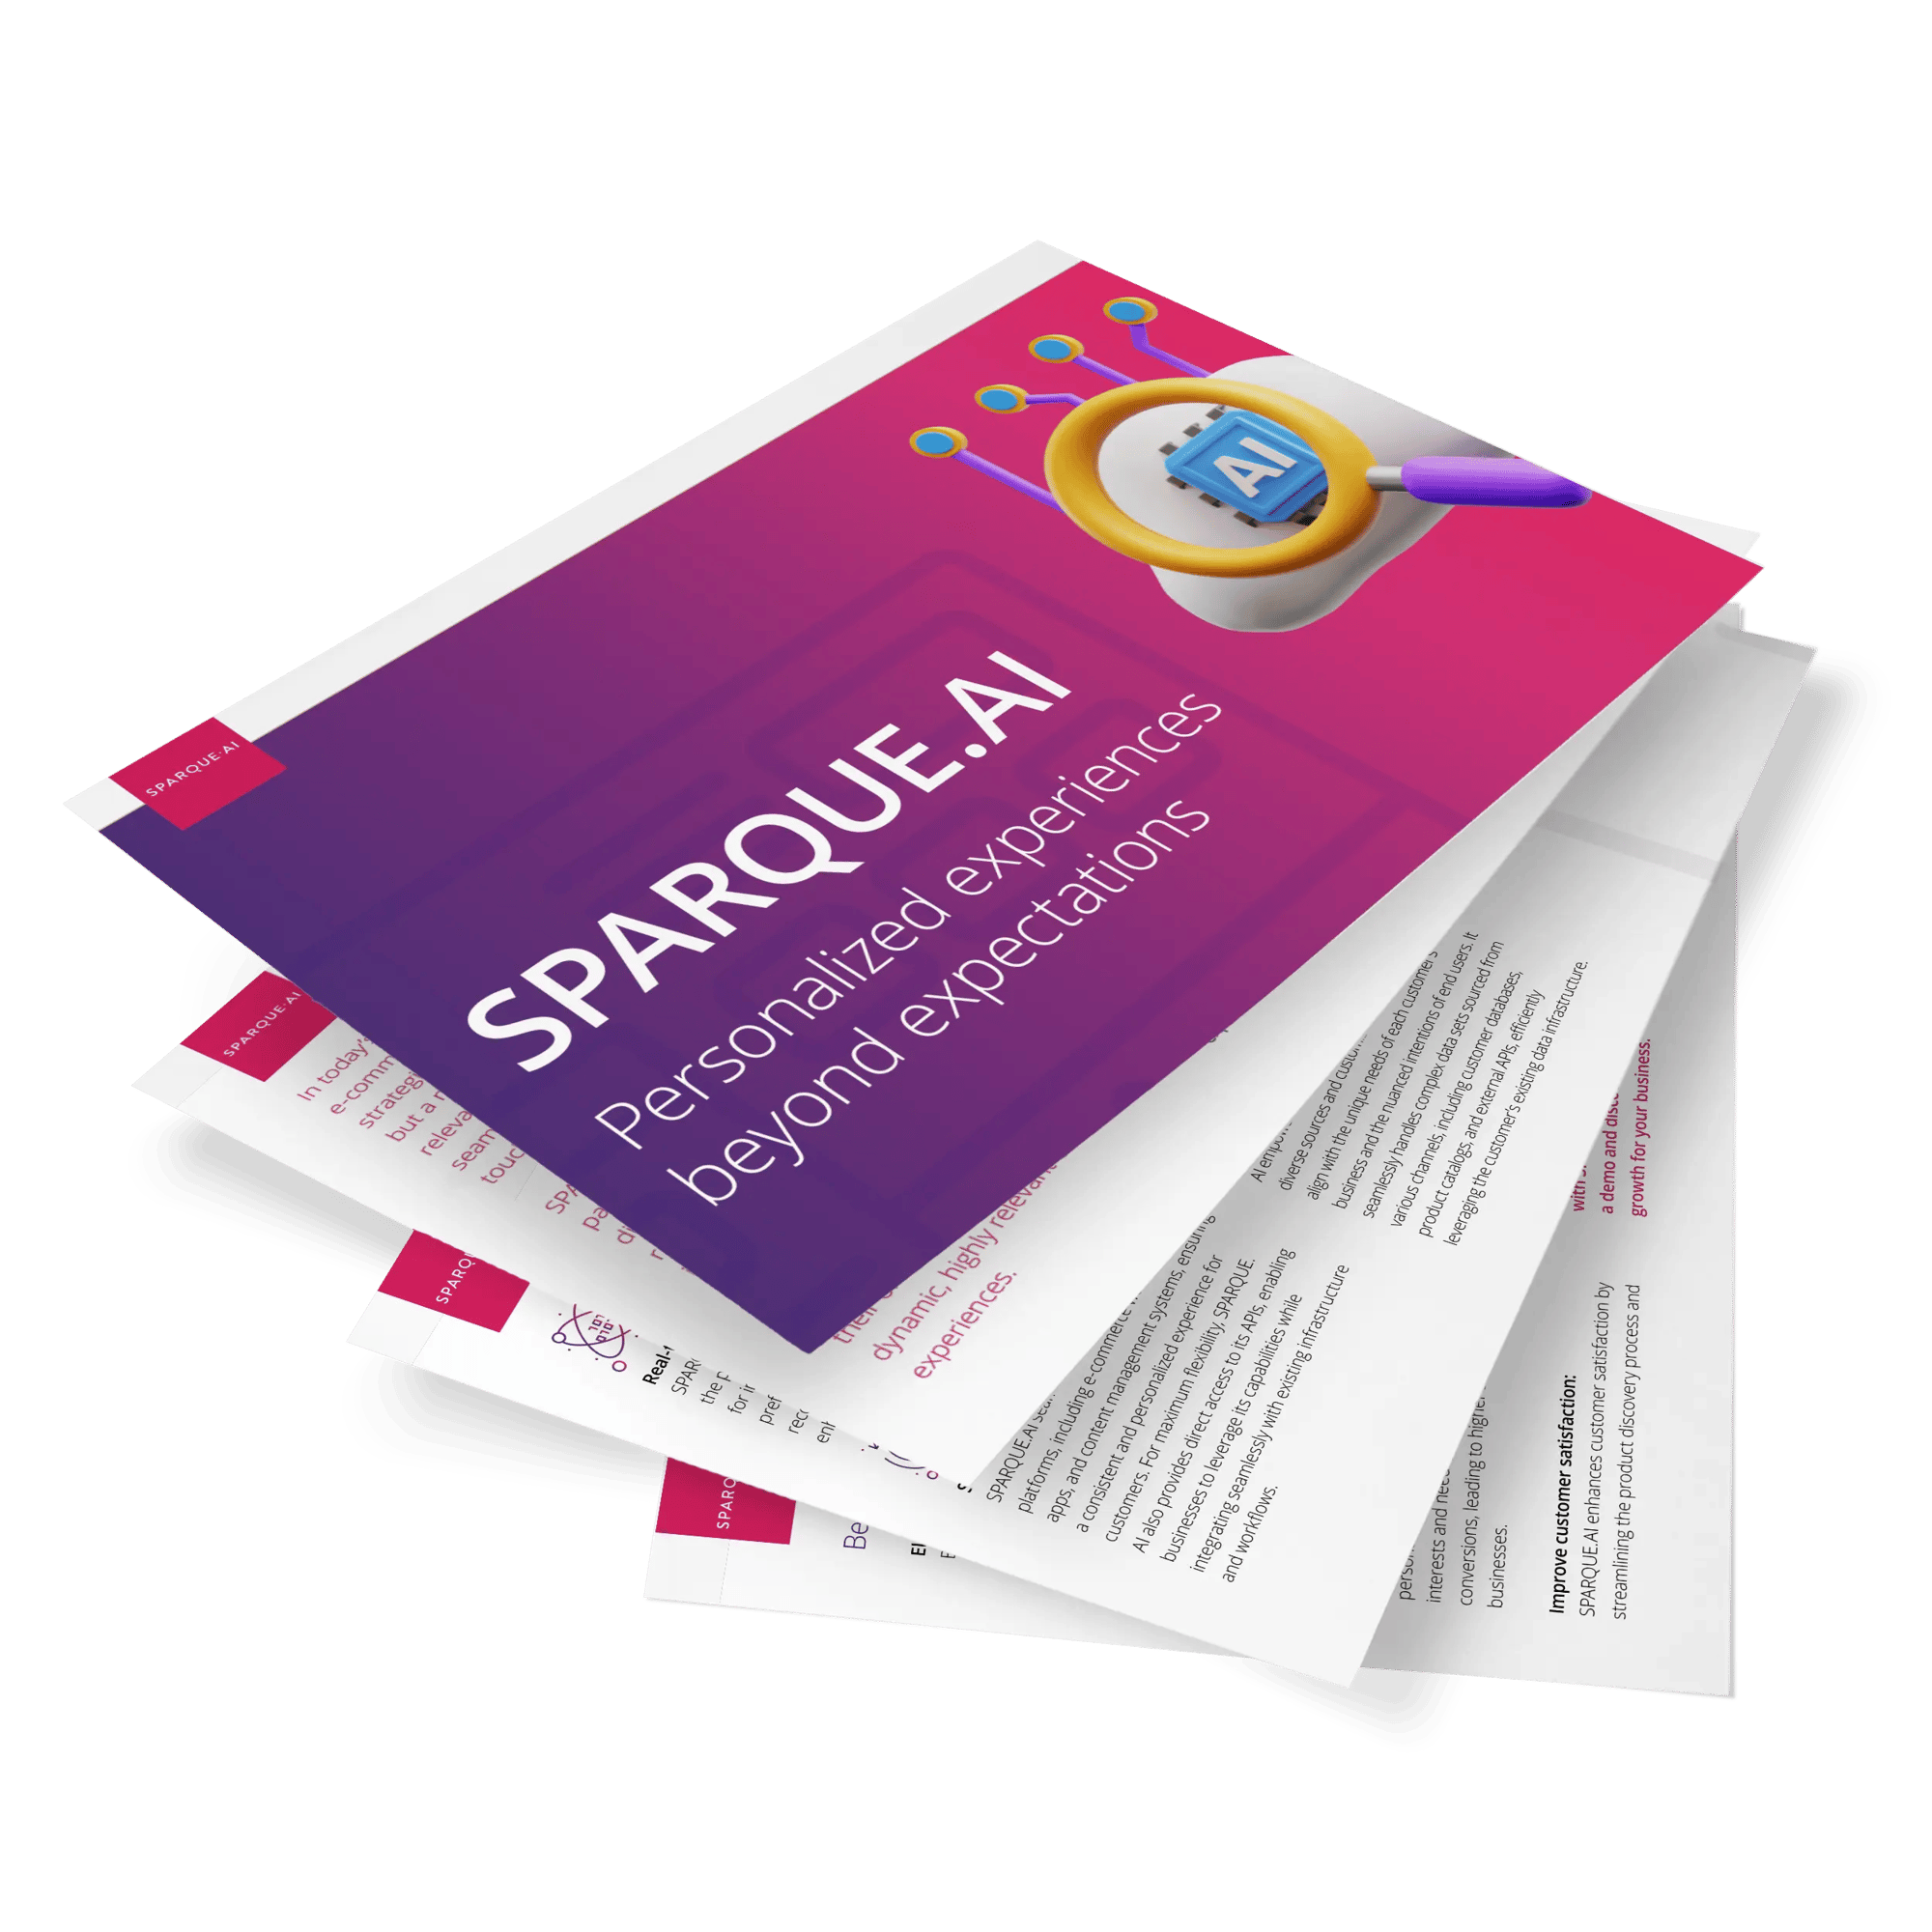 search and recommendations powered by SPARQUE.AI - brochure